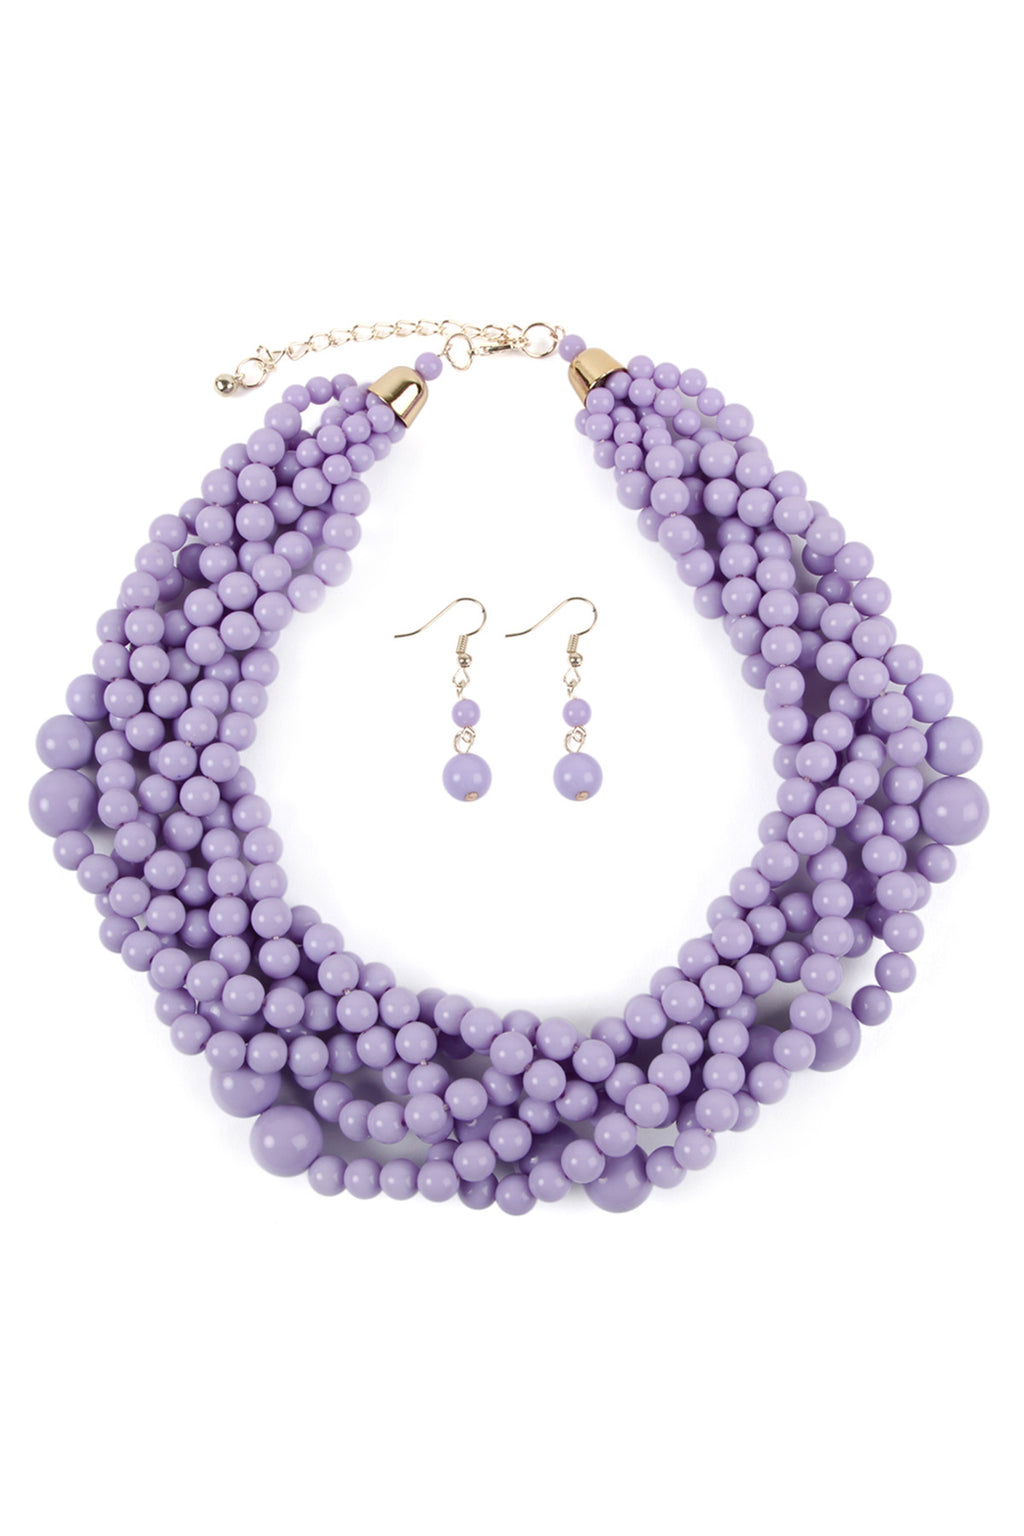 Lavender Multi Strand Bubble Choker Necklace And Earring Set - Pack of 6